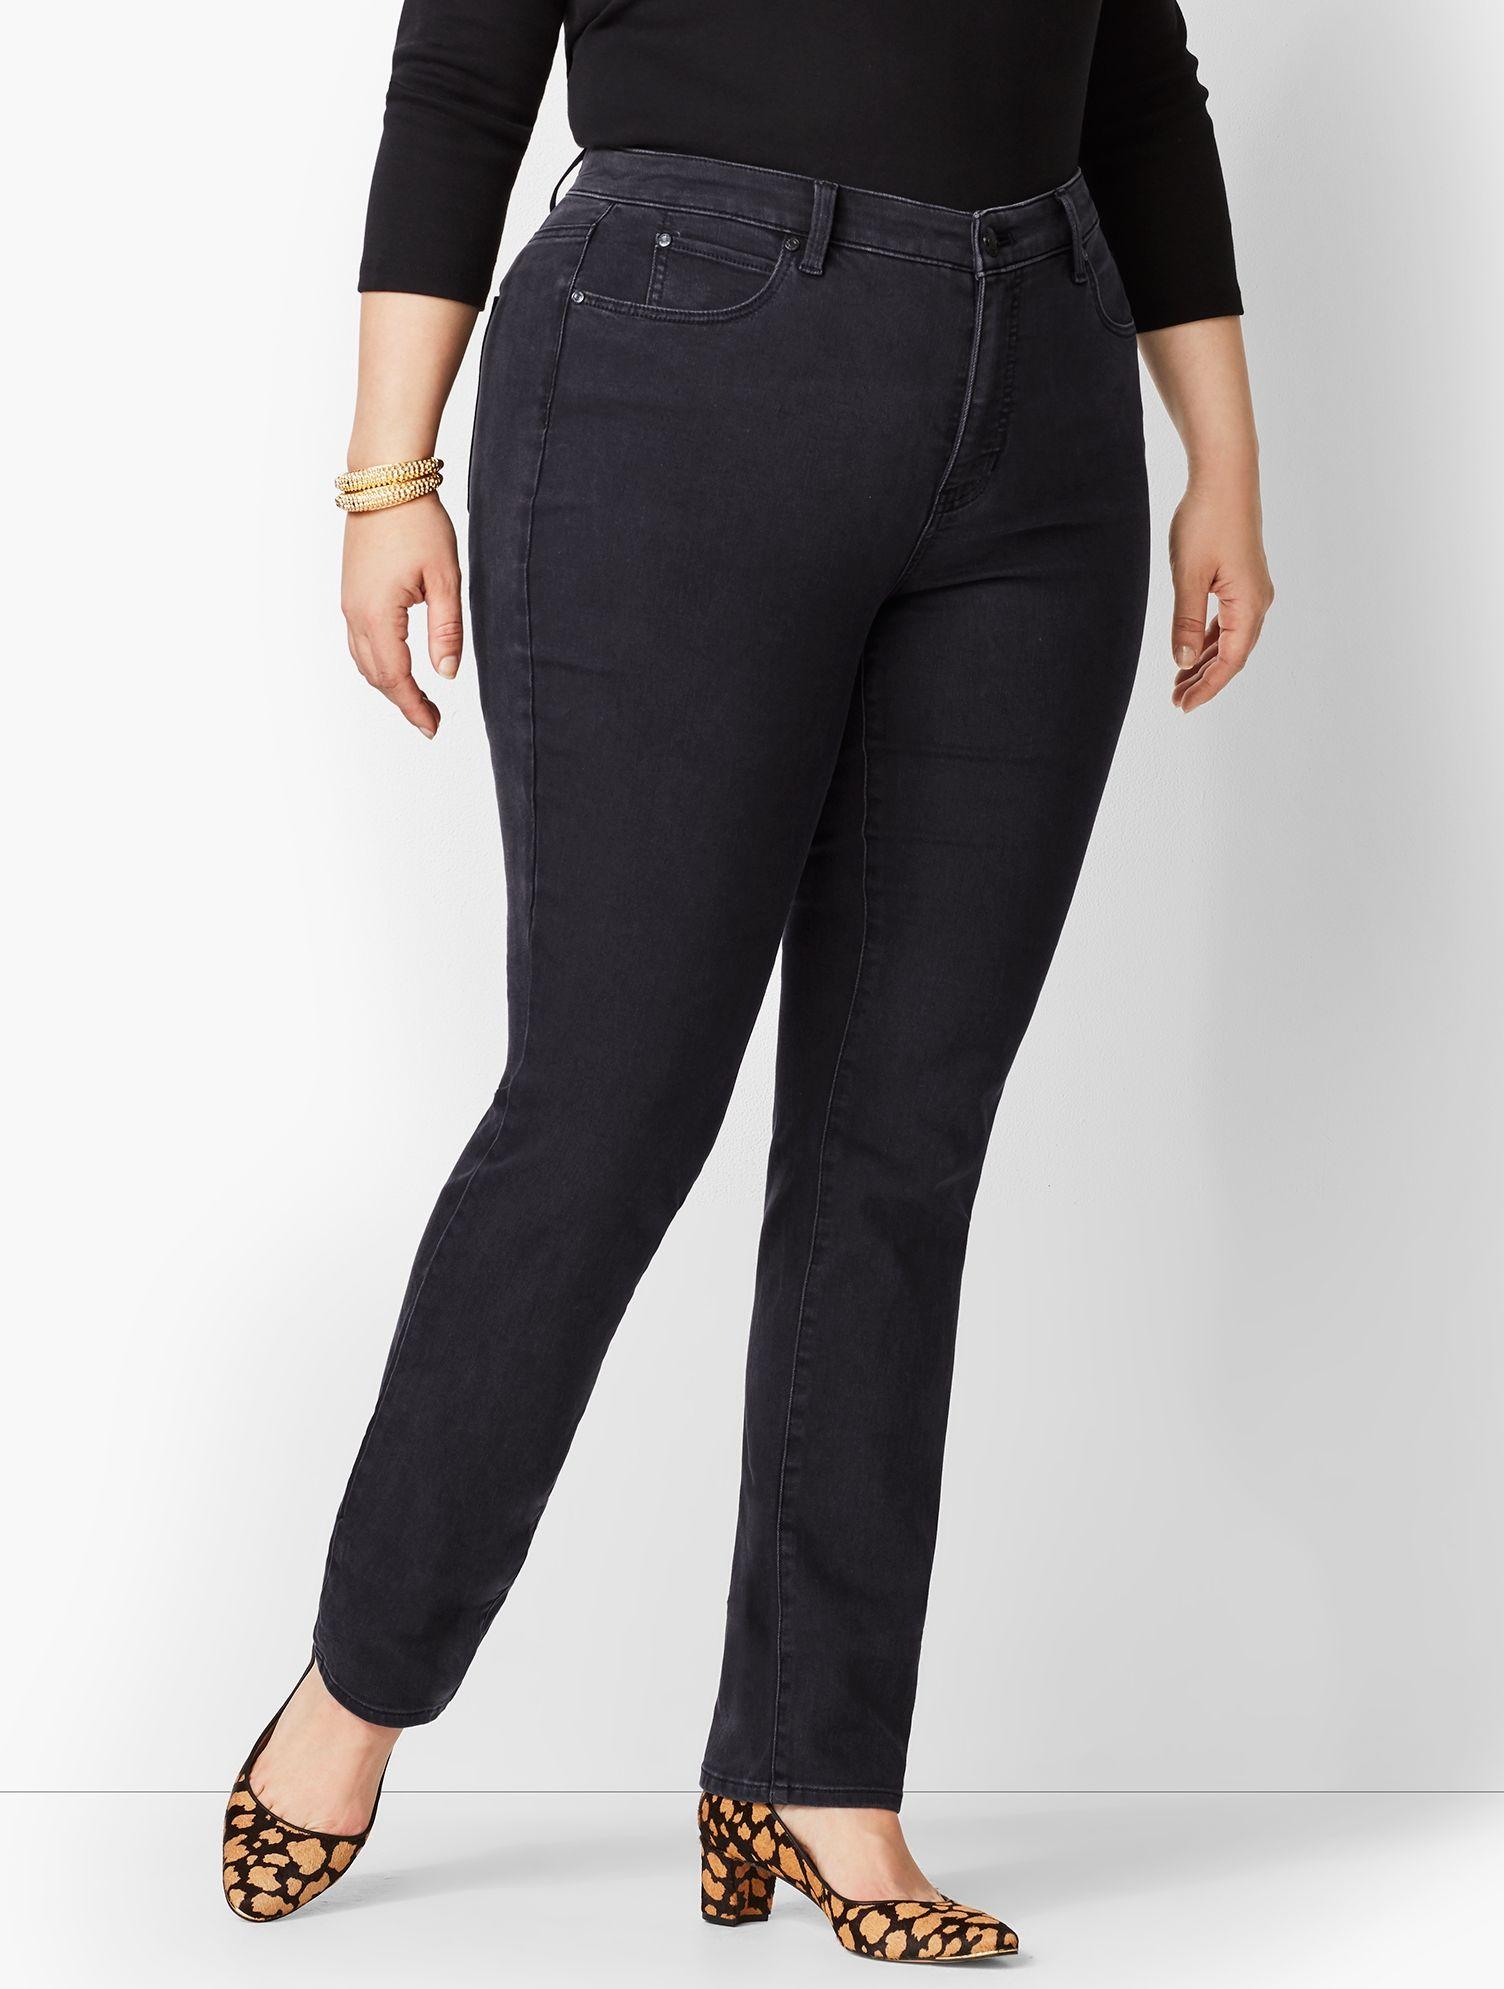 Lyst - Talbots Plus Size Exclusive High-waist Straight-leg Jeans in Black